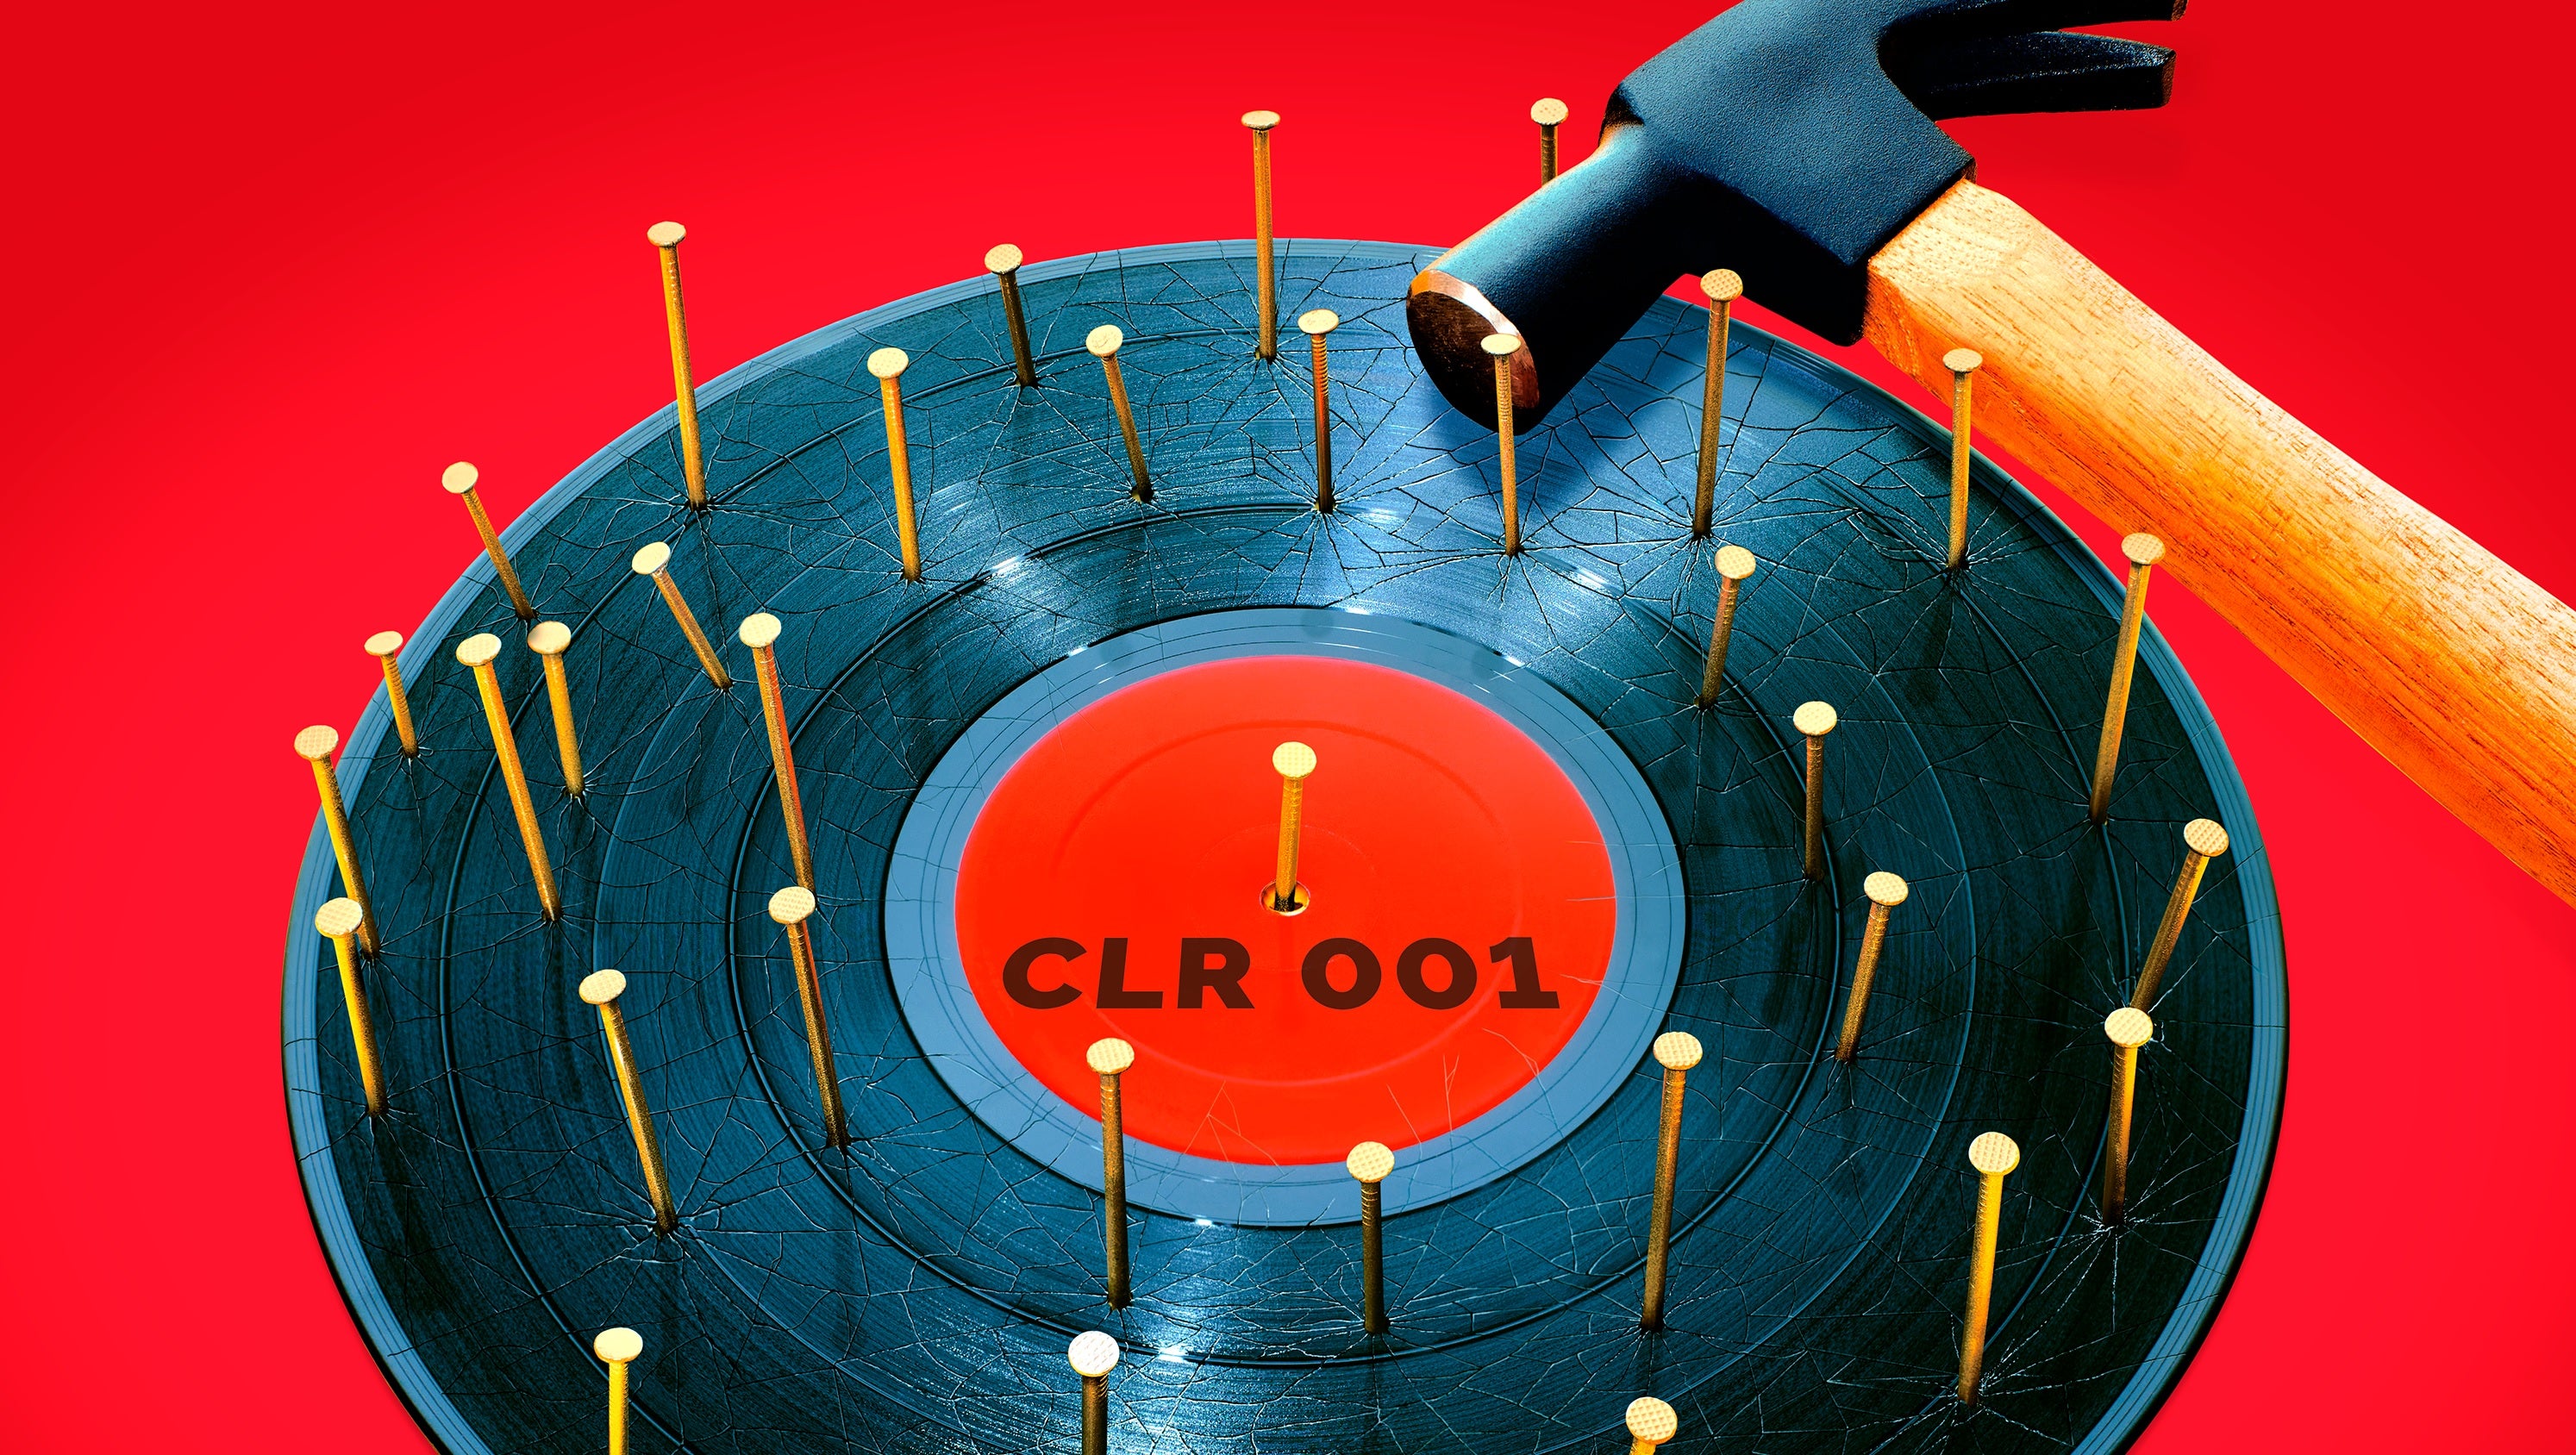 CircoLoco Records - Monday Dreamin' album artwork: A record labeled "CLR 001" with a bunch of nails through it and a hammer laying on its side on top.